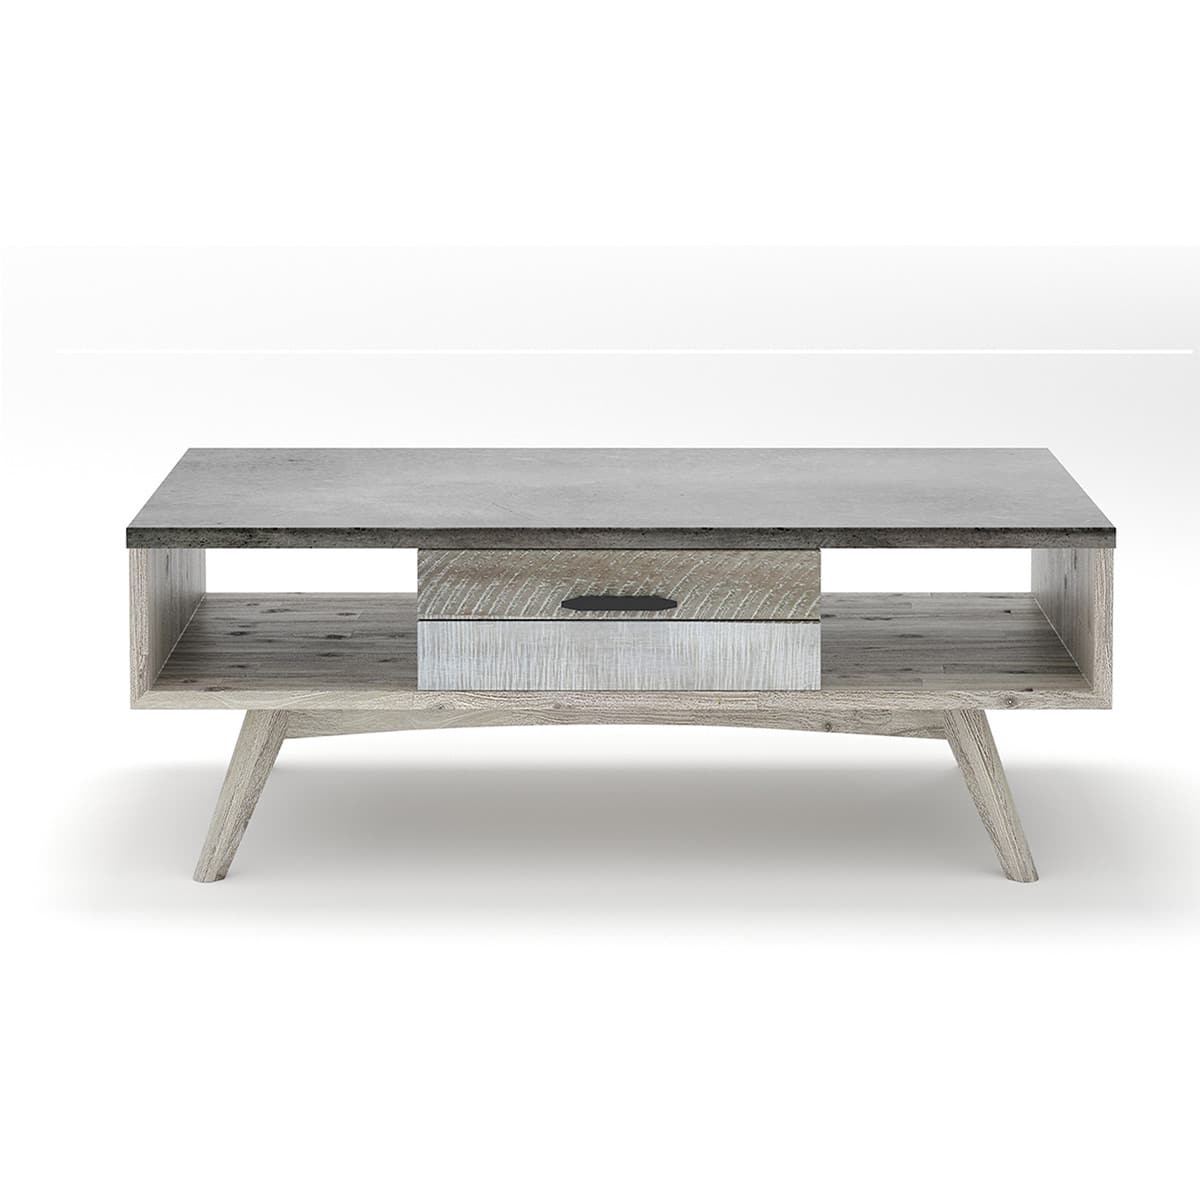 tobago-couch-table-1100x600x400-1200×1200-1